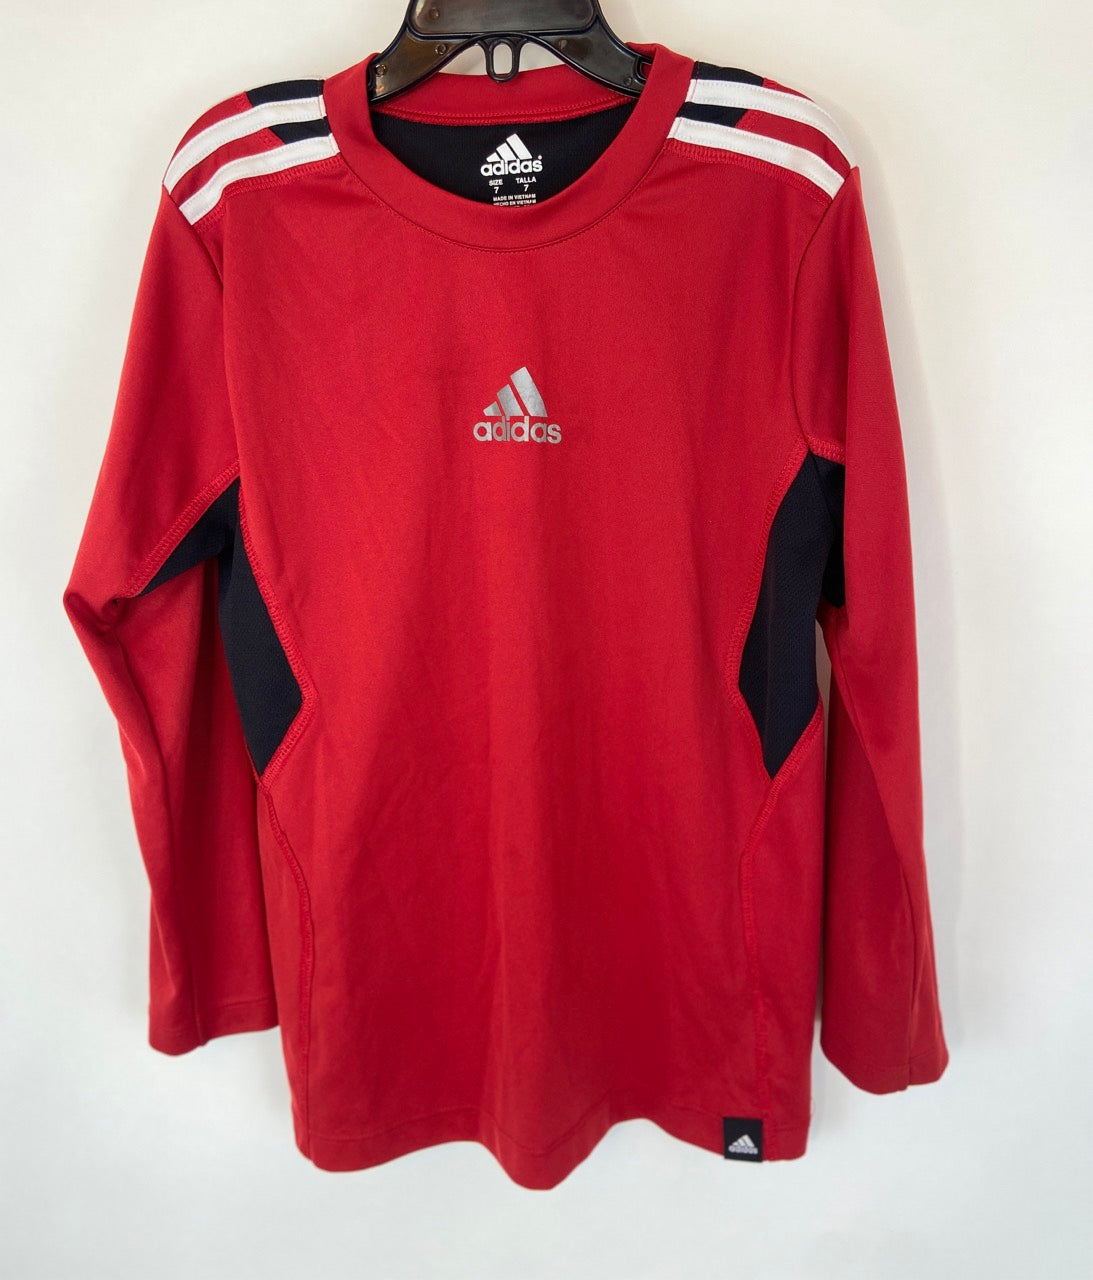 Adidas Red Sleeve- Youth S (7) The Adopted